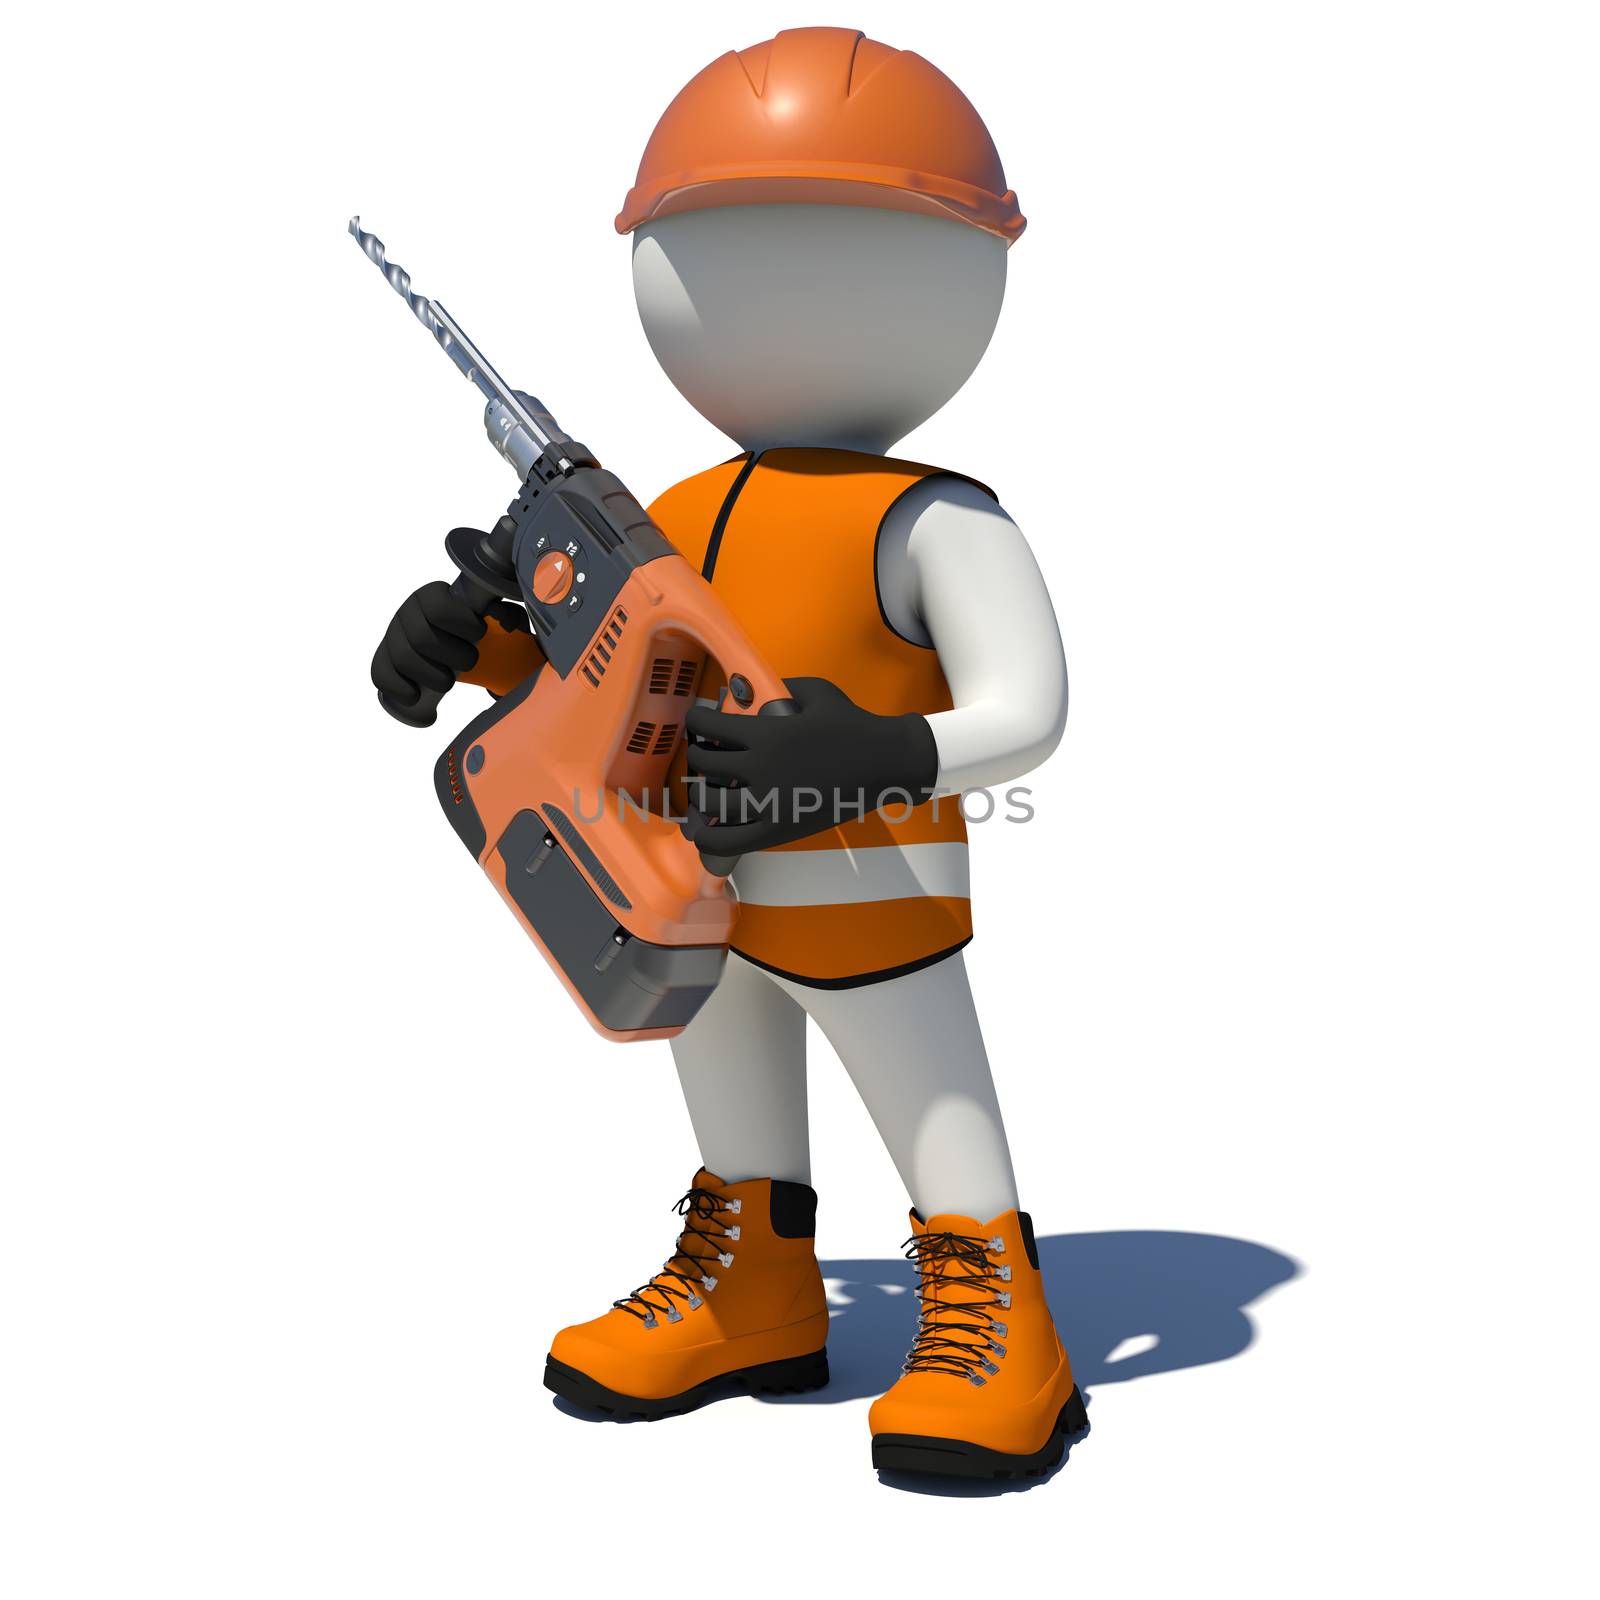 White man in vest, shoes and helmet holding electric perforator. Isolated render on white background